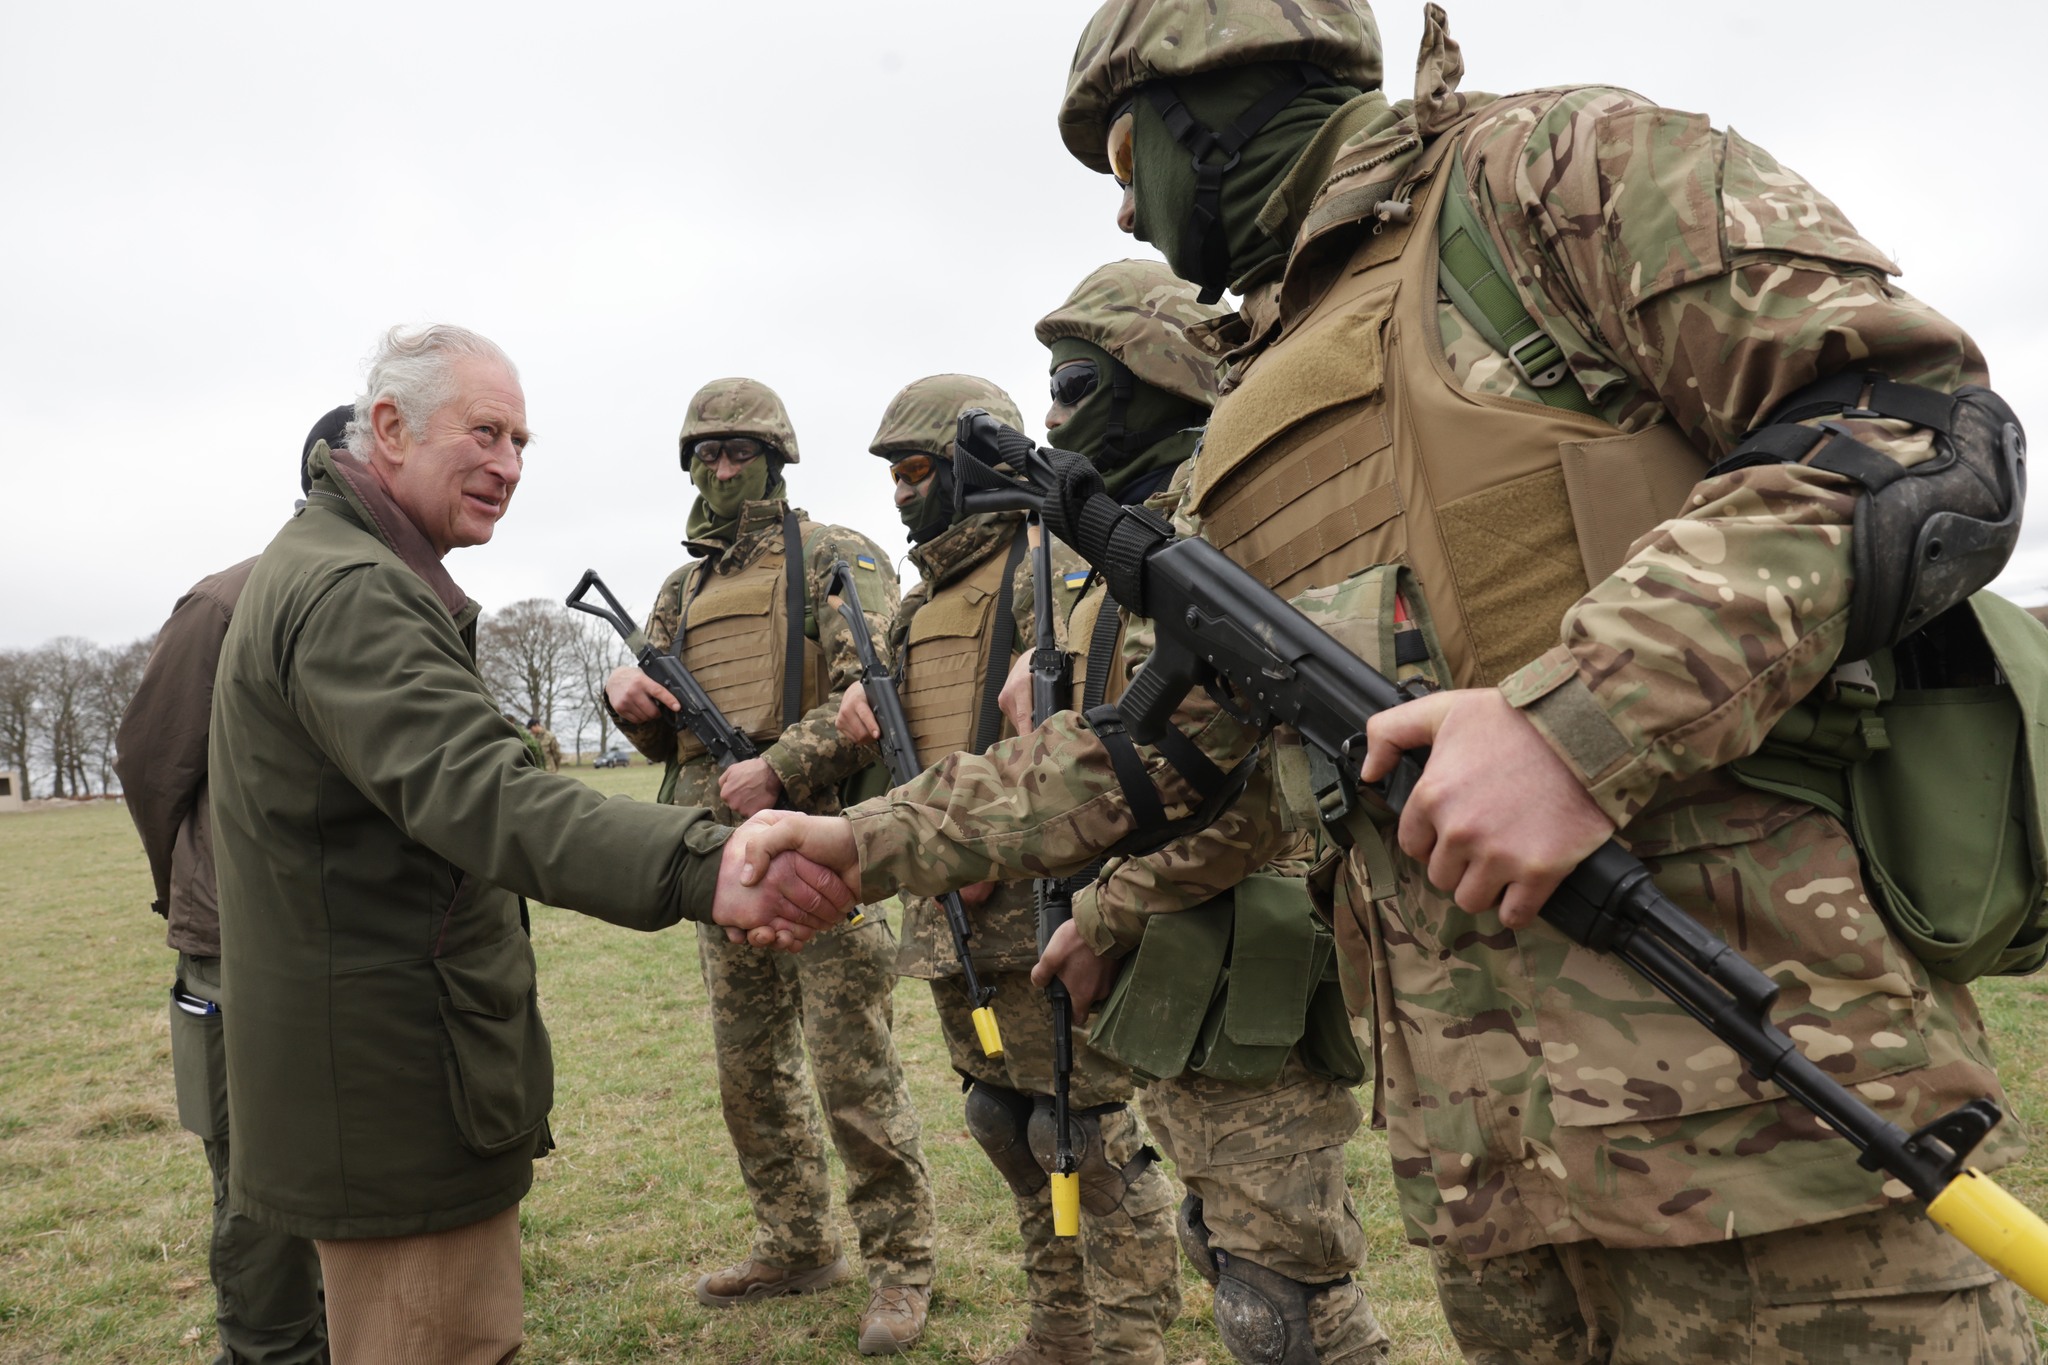 King Charles III meets with Ukrainian recruits during a visit to a training site for Ukrainian military recruits, in Wiltshire, where recruits are completing five weeks of basic combat training by British and international partner forces, before returning to fight in Ukraine. Picture date: Monday February 20, 2023.